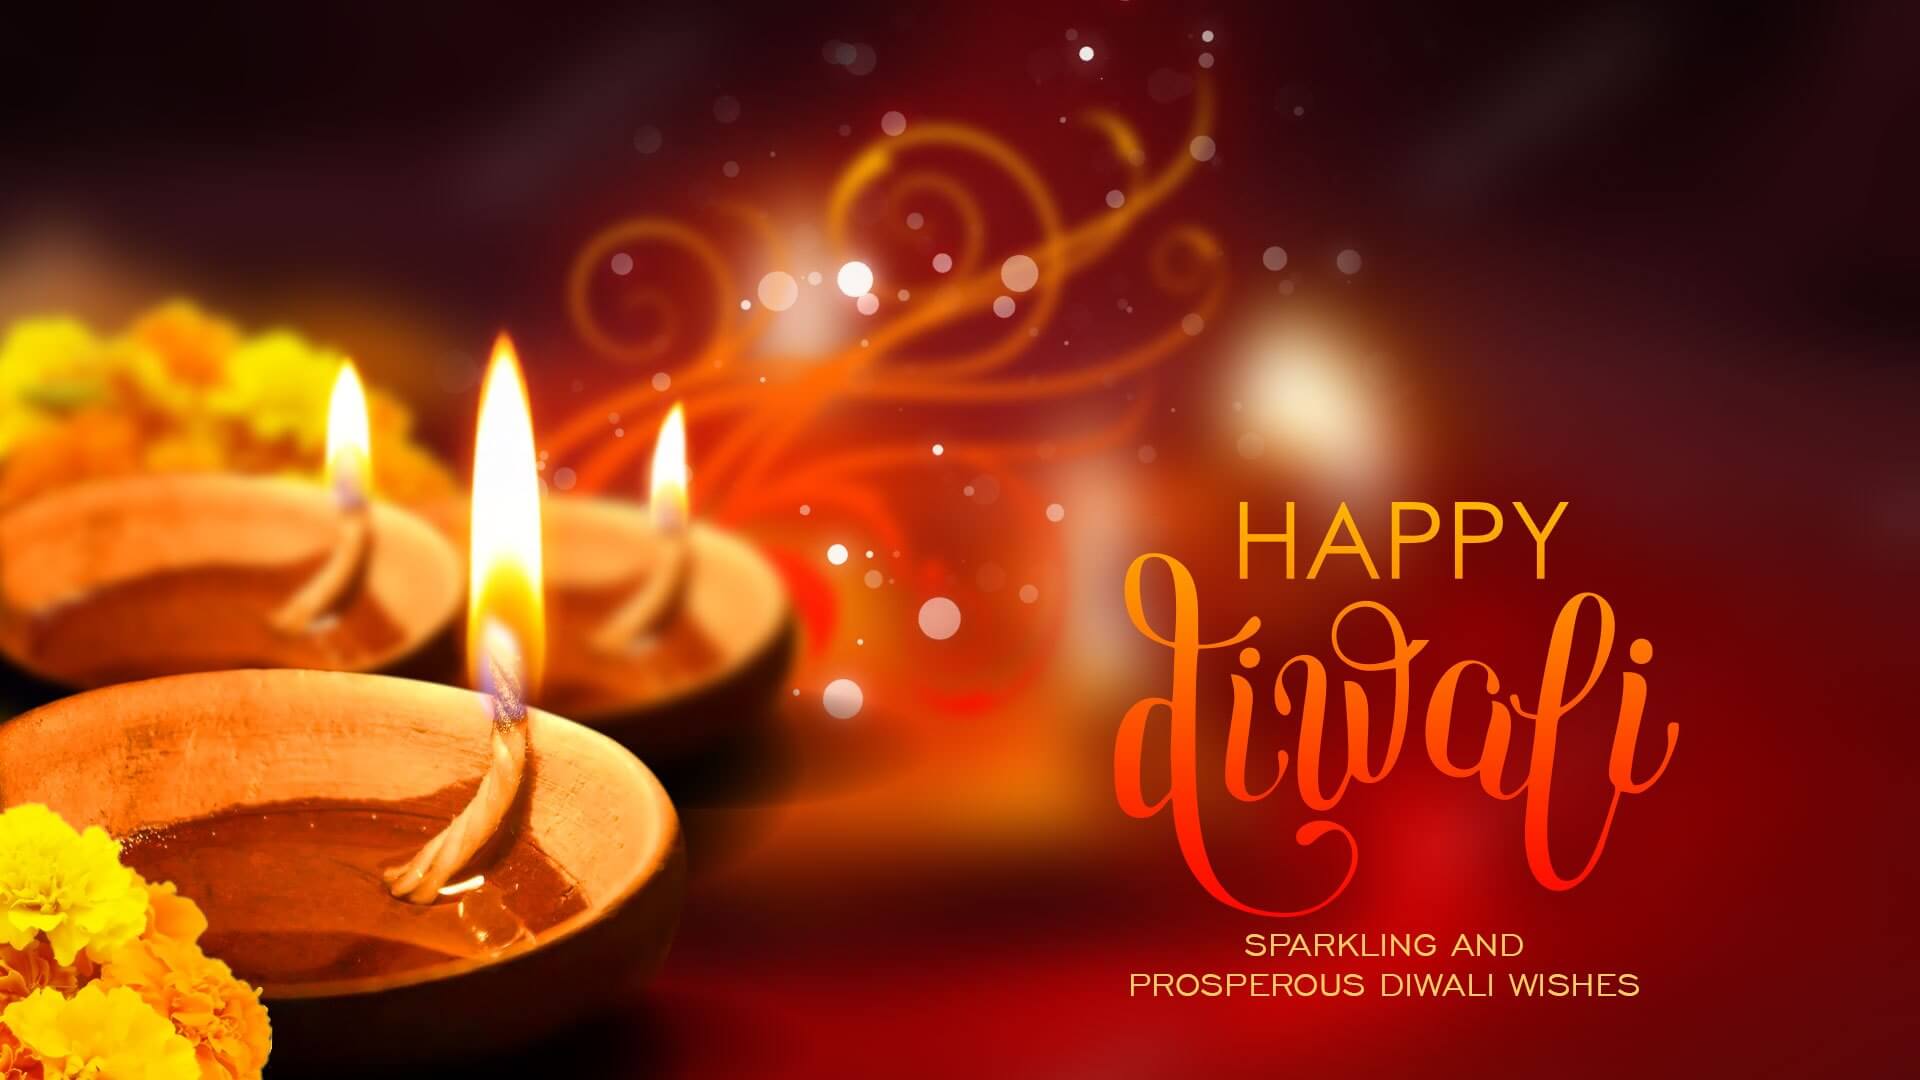 Happy Diwali Wishes, Quotes, Diwali Messages, Diwali Image 2021